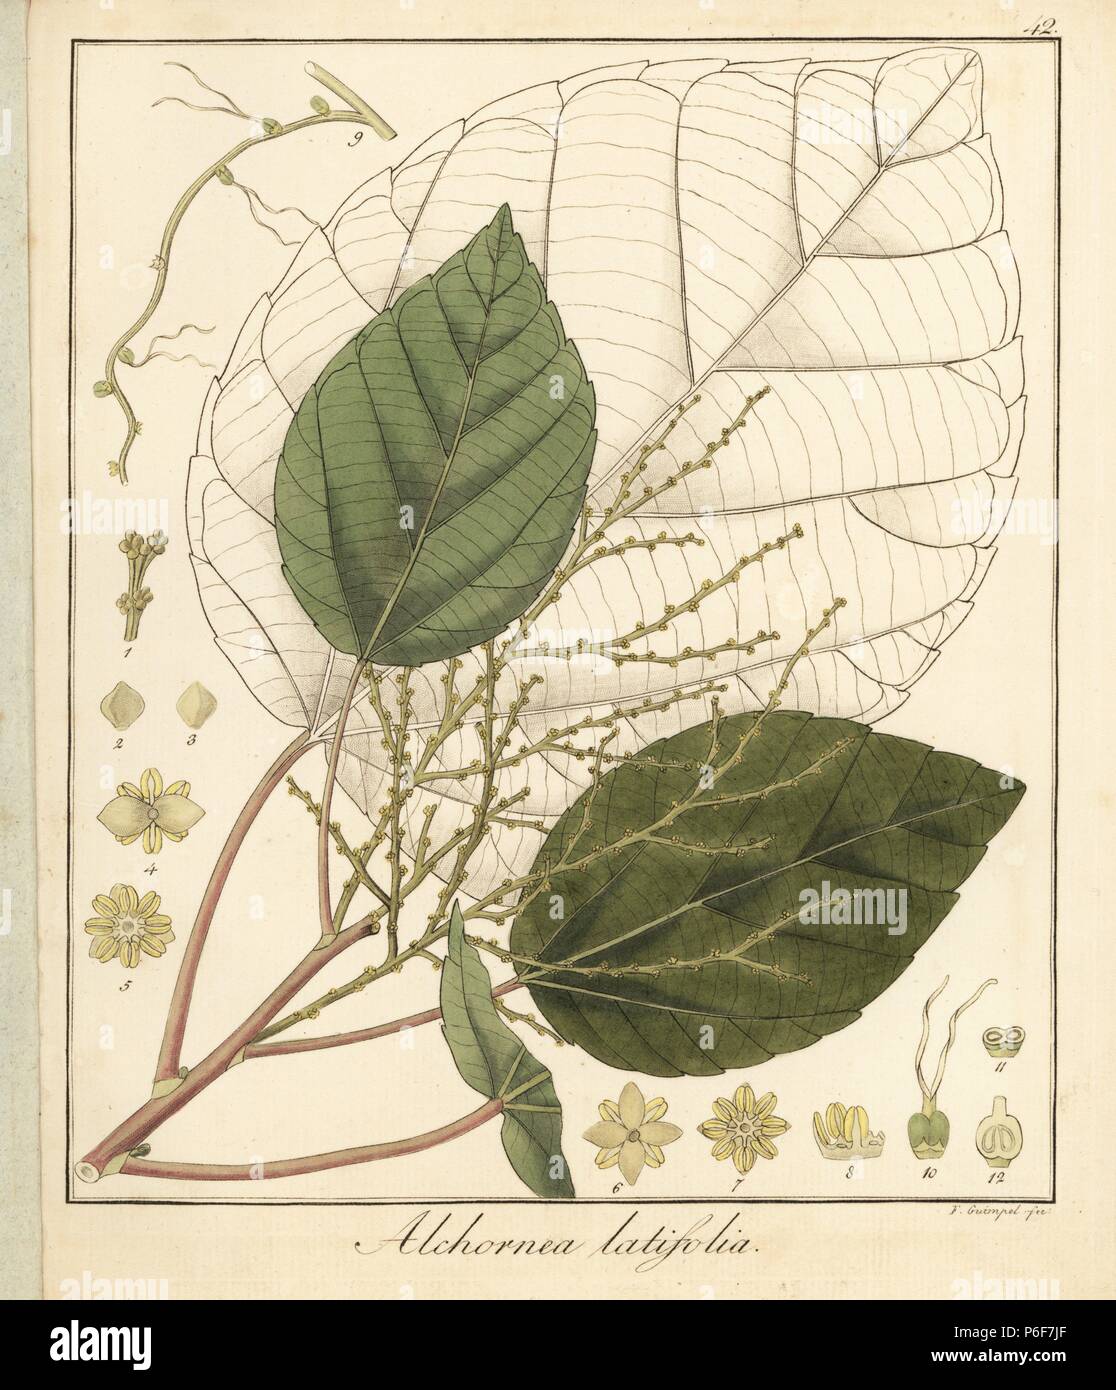 Achiotillo tree, Alchornea latifolia. Handcoloured copperplate engraving by F. Guimpel from Dr. Friedrich Gottlob Hayne's Medical Botany, Berlin, 1822. Hayne (1763-1832) was a German botanist, apothecary and professor of pharmaceutical botany at Berlin University. Stock Photo